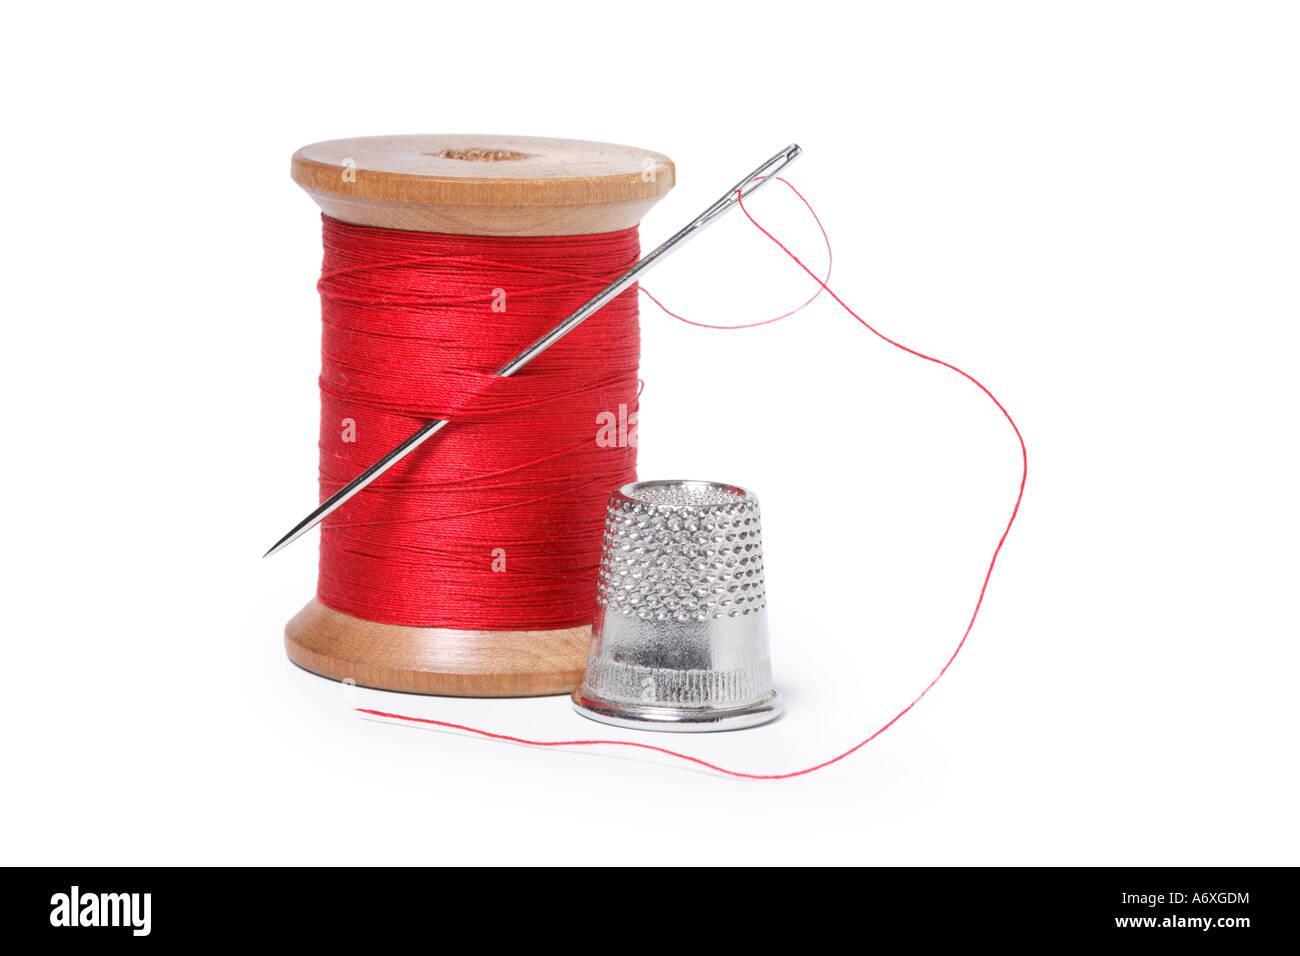 Thimble, needle and spool of thread cut out on white background Stock Photo